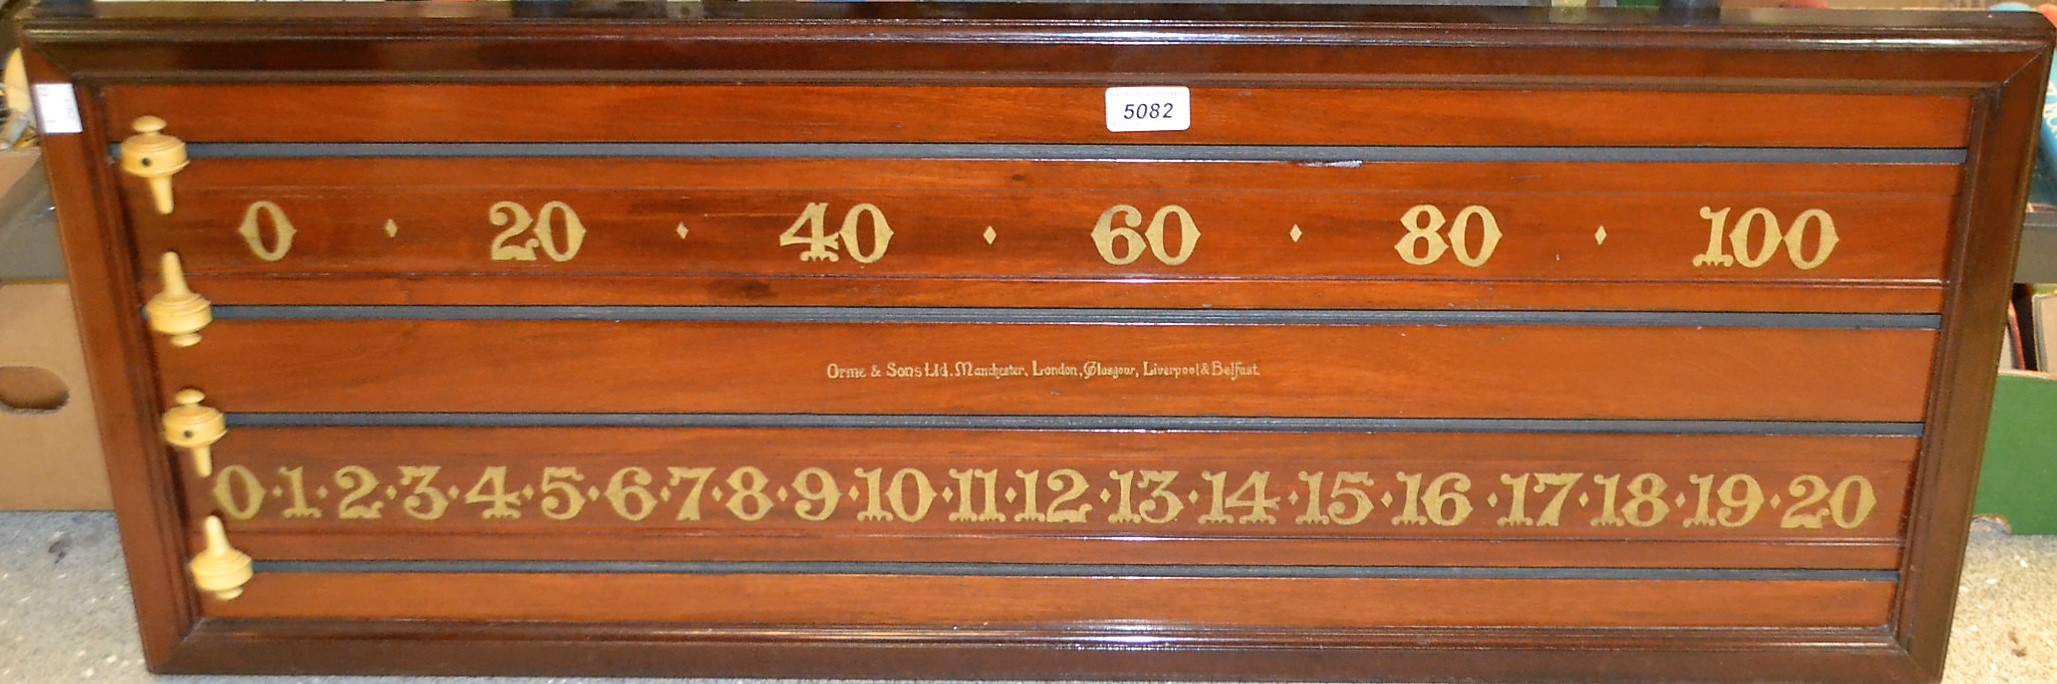 A mahogany snooker scoreboard, Orme & Sons, Manchester, London, Glasgow, Liverpool & Belfast, 92.